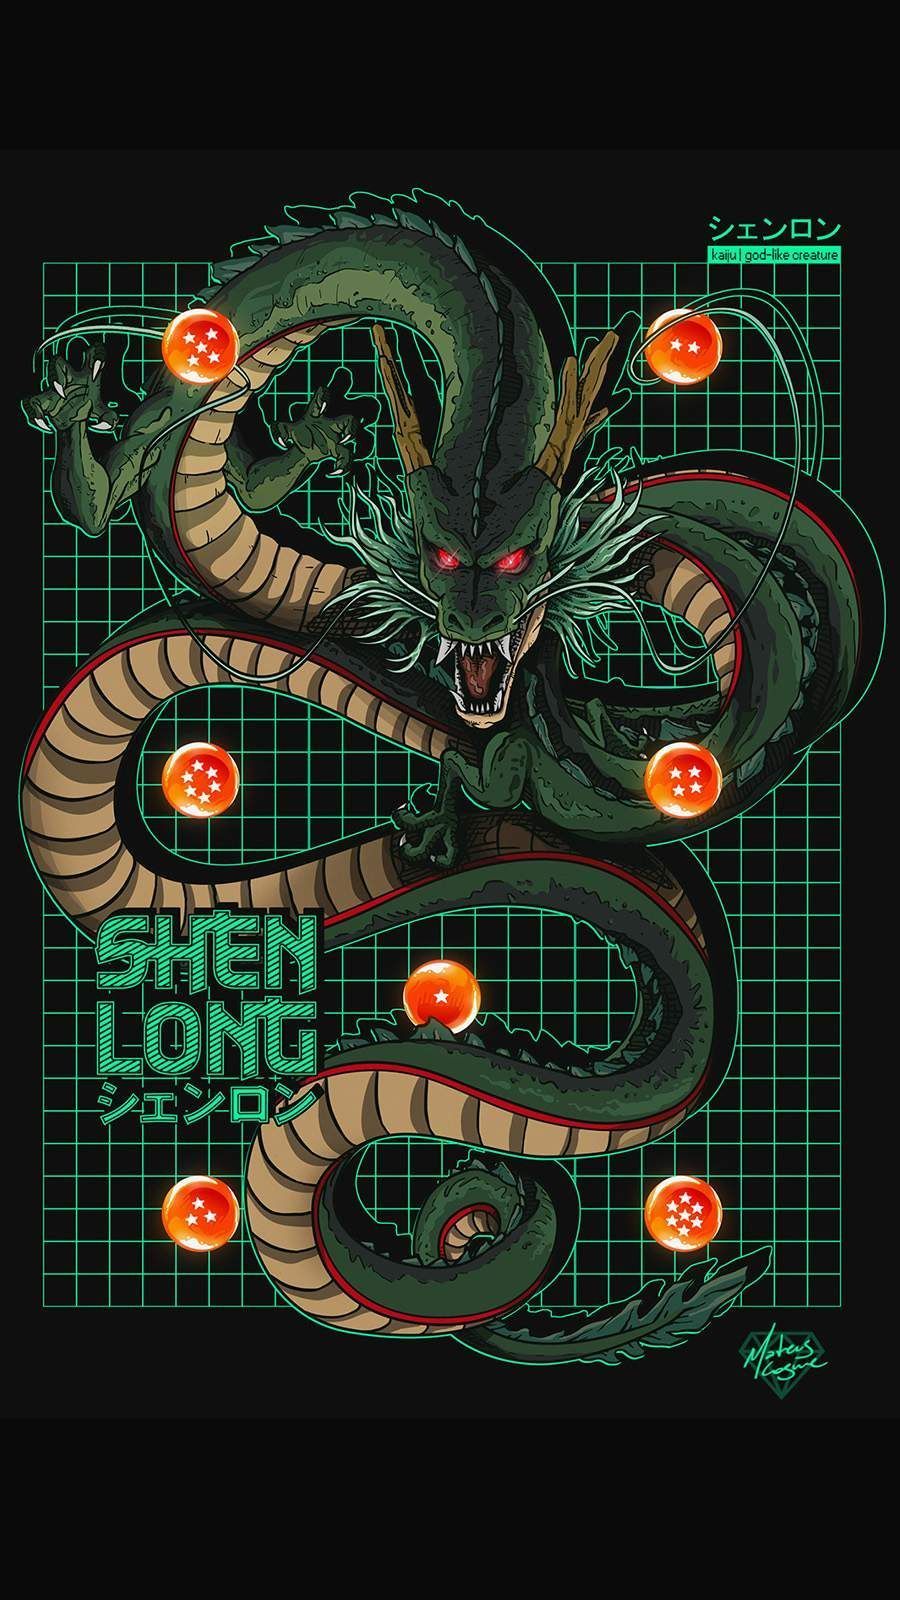 Shenron Shenron is a powerful dragon in the anime series Dragon Ball Z. He is a powerful dragon who grants wishes to those who call out his name. He is often seen in the company of the main character, Goku, and is a key player in many of the series' battles. - Dragon, Dragon Ball